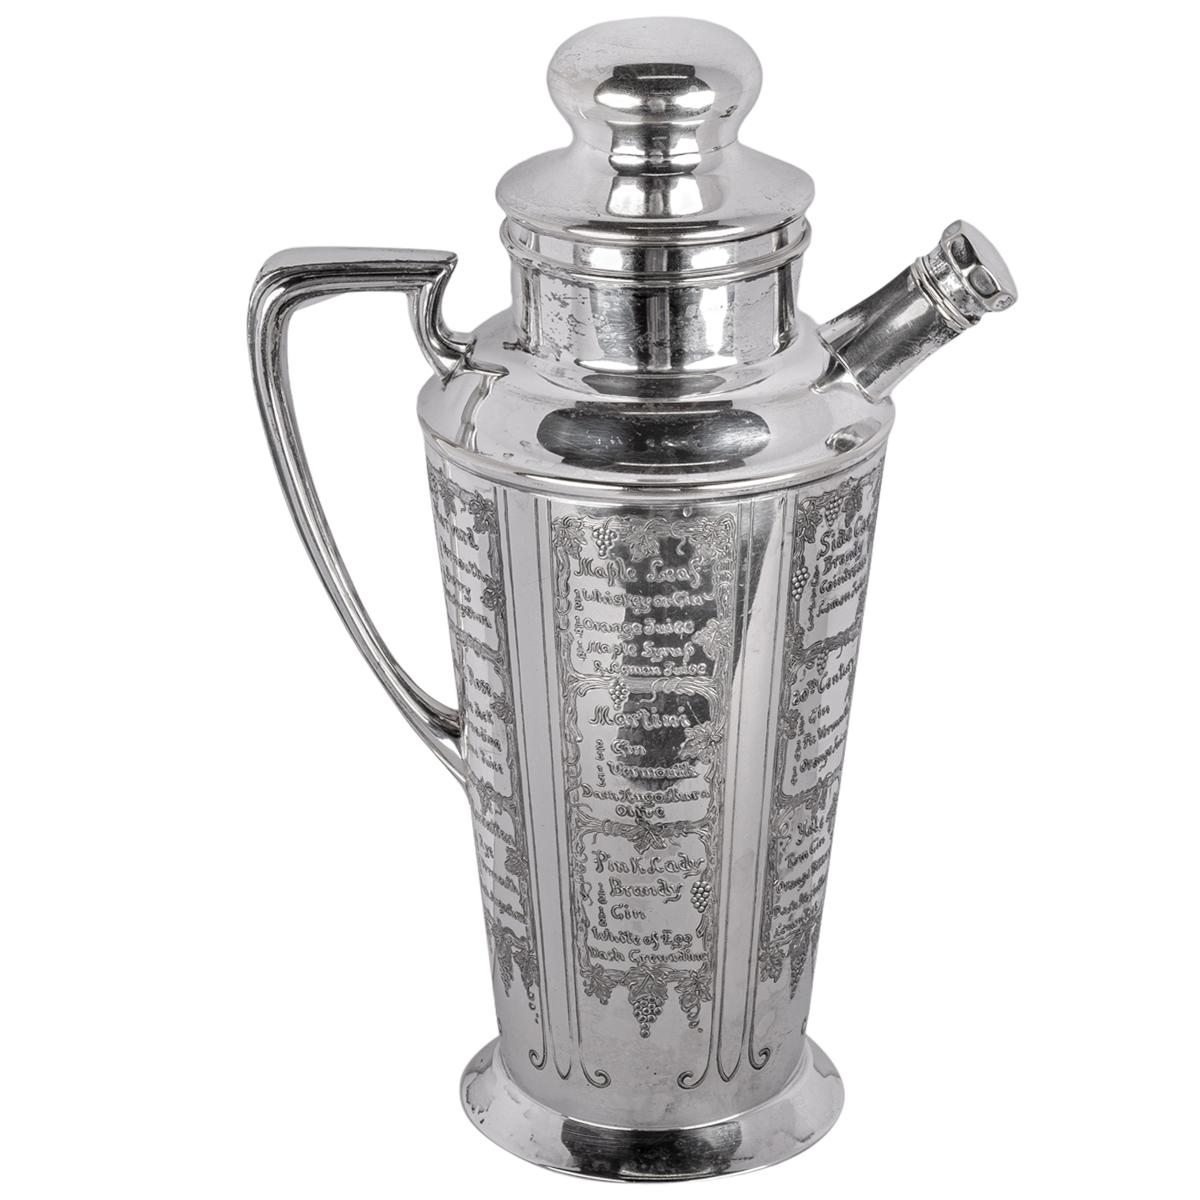 A good antique American Art Deco Silver plate cocktail/recipe shaker, 1930.
The shaker made by Bernard Rice & Sons and titled 